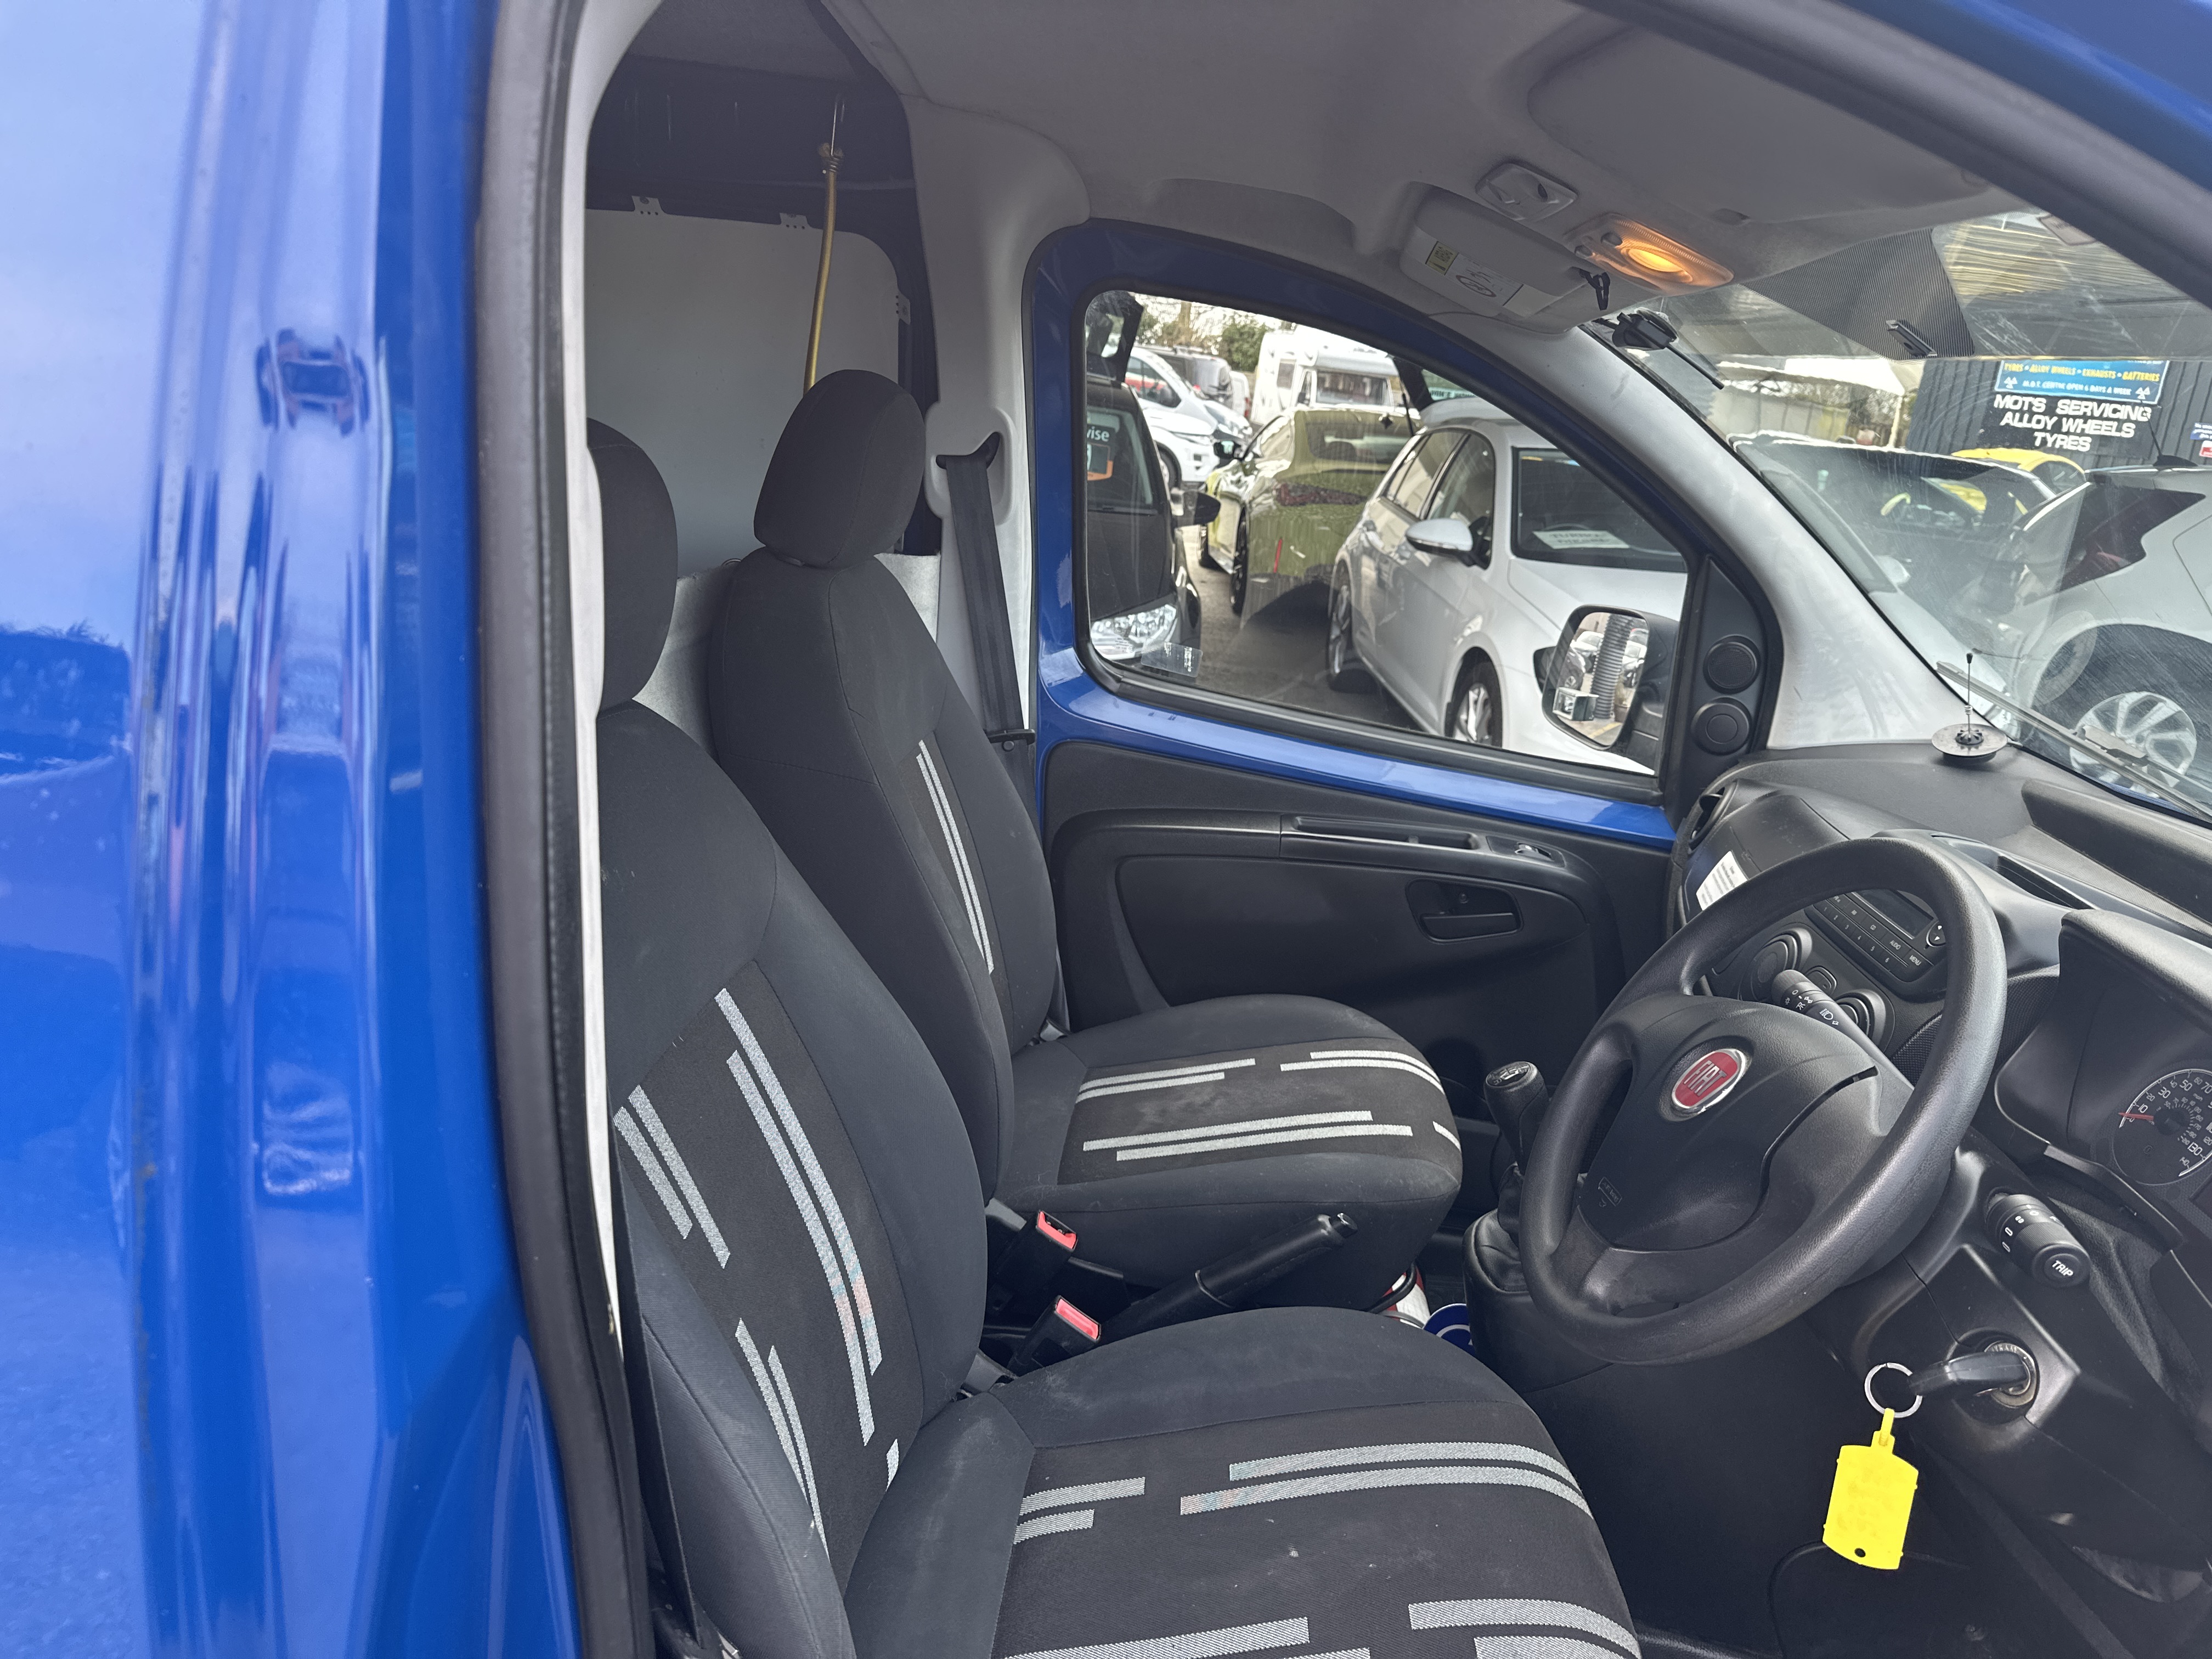 Fiat FIORINO for sale at Mike Howlin Motor Sales Pembrokeshire